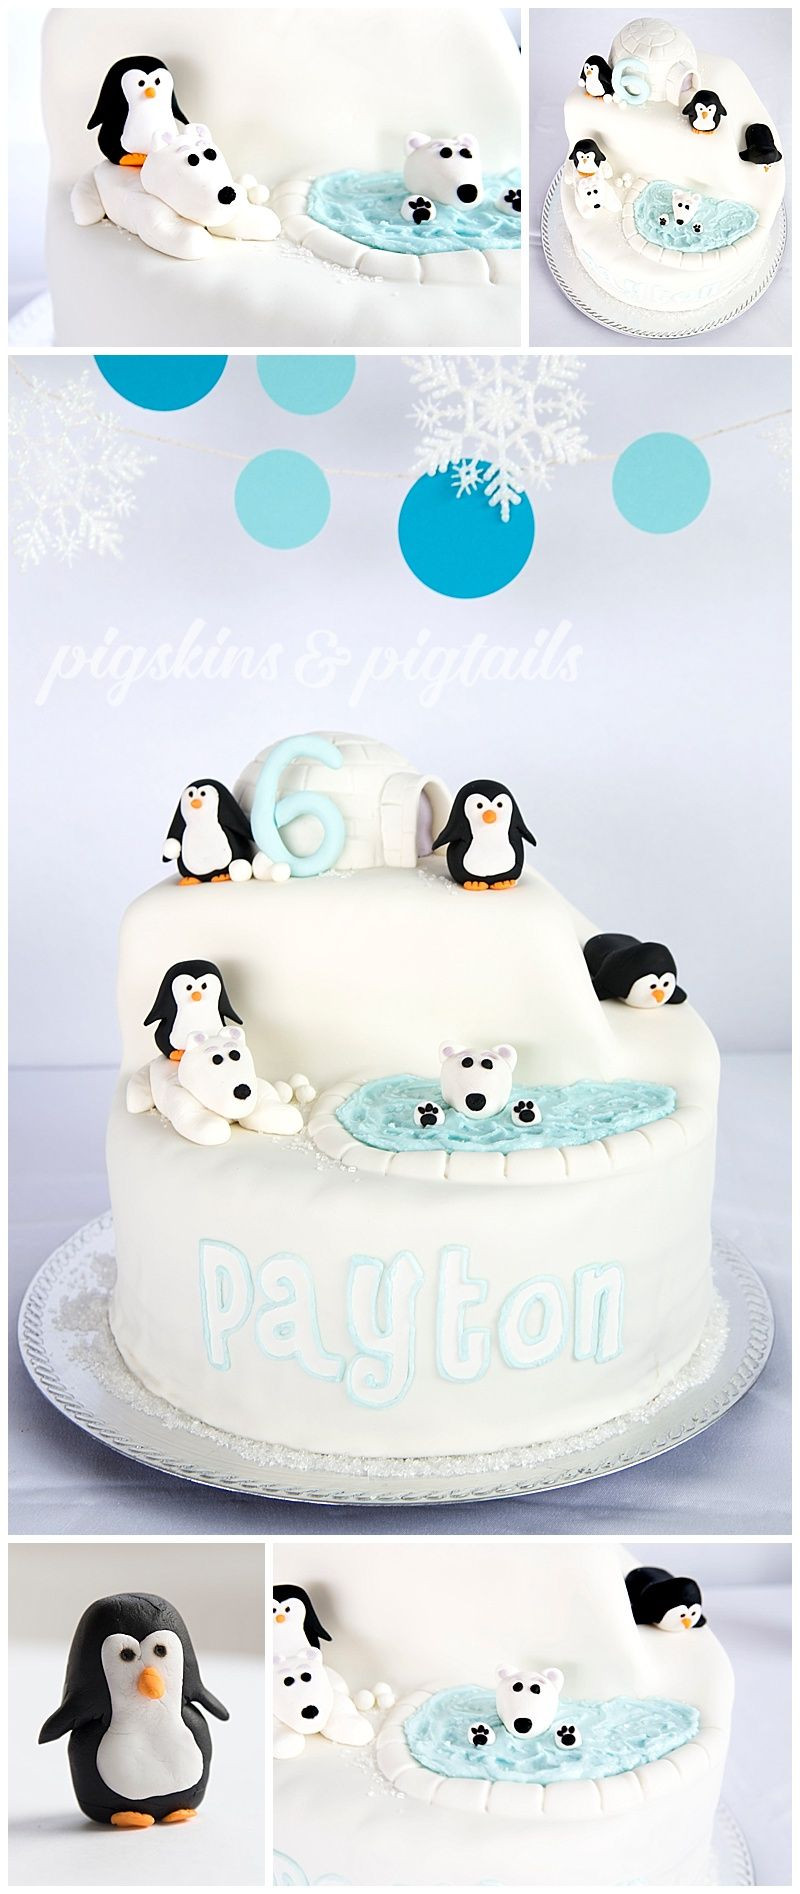 Winter Pool Party Ideas
 Polar Bears & Penguins Winter Pool Party